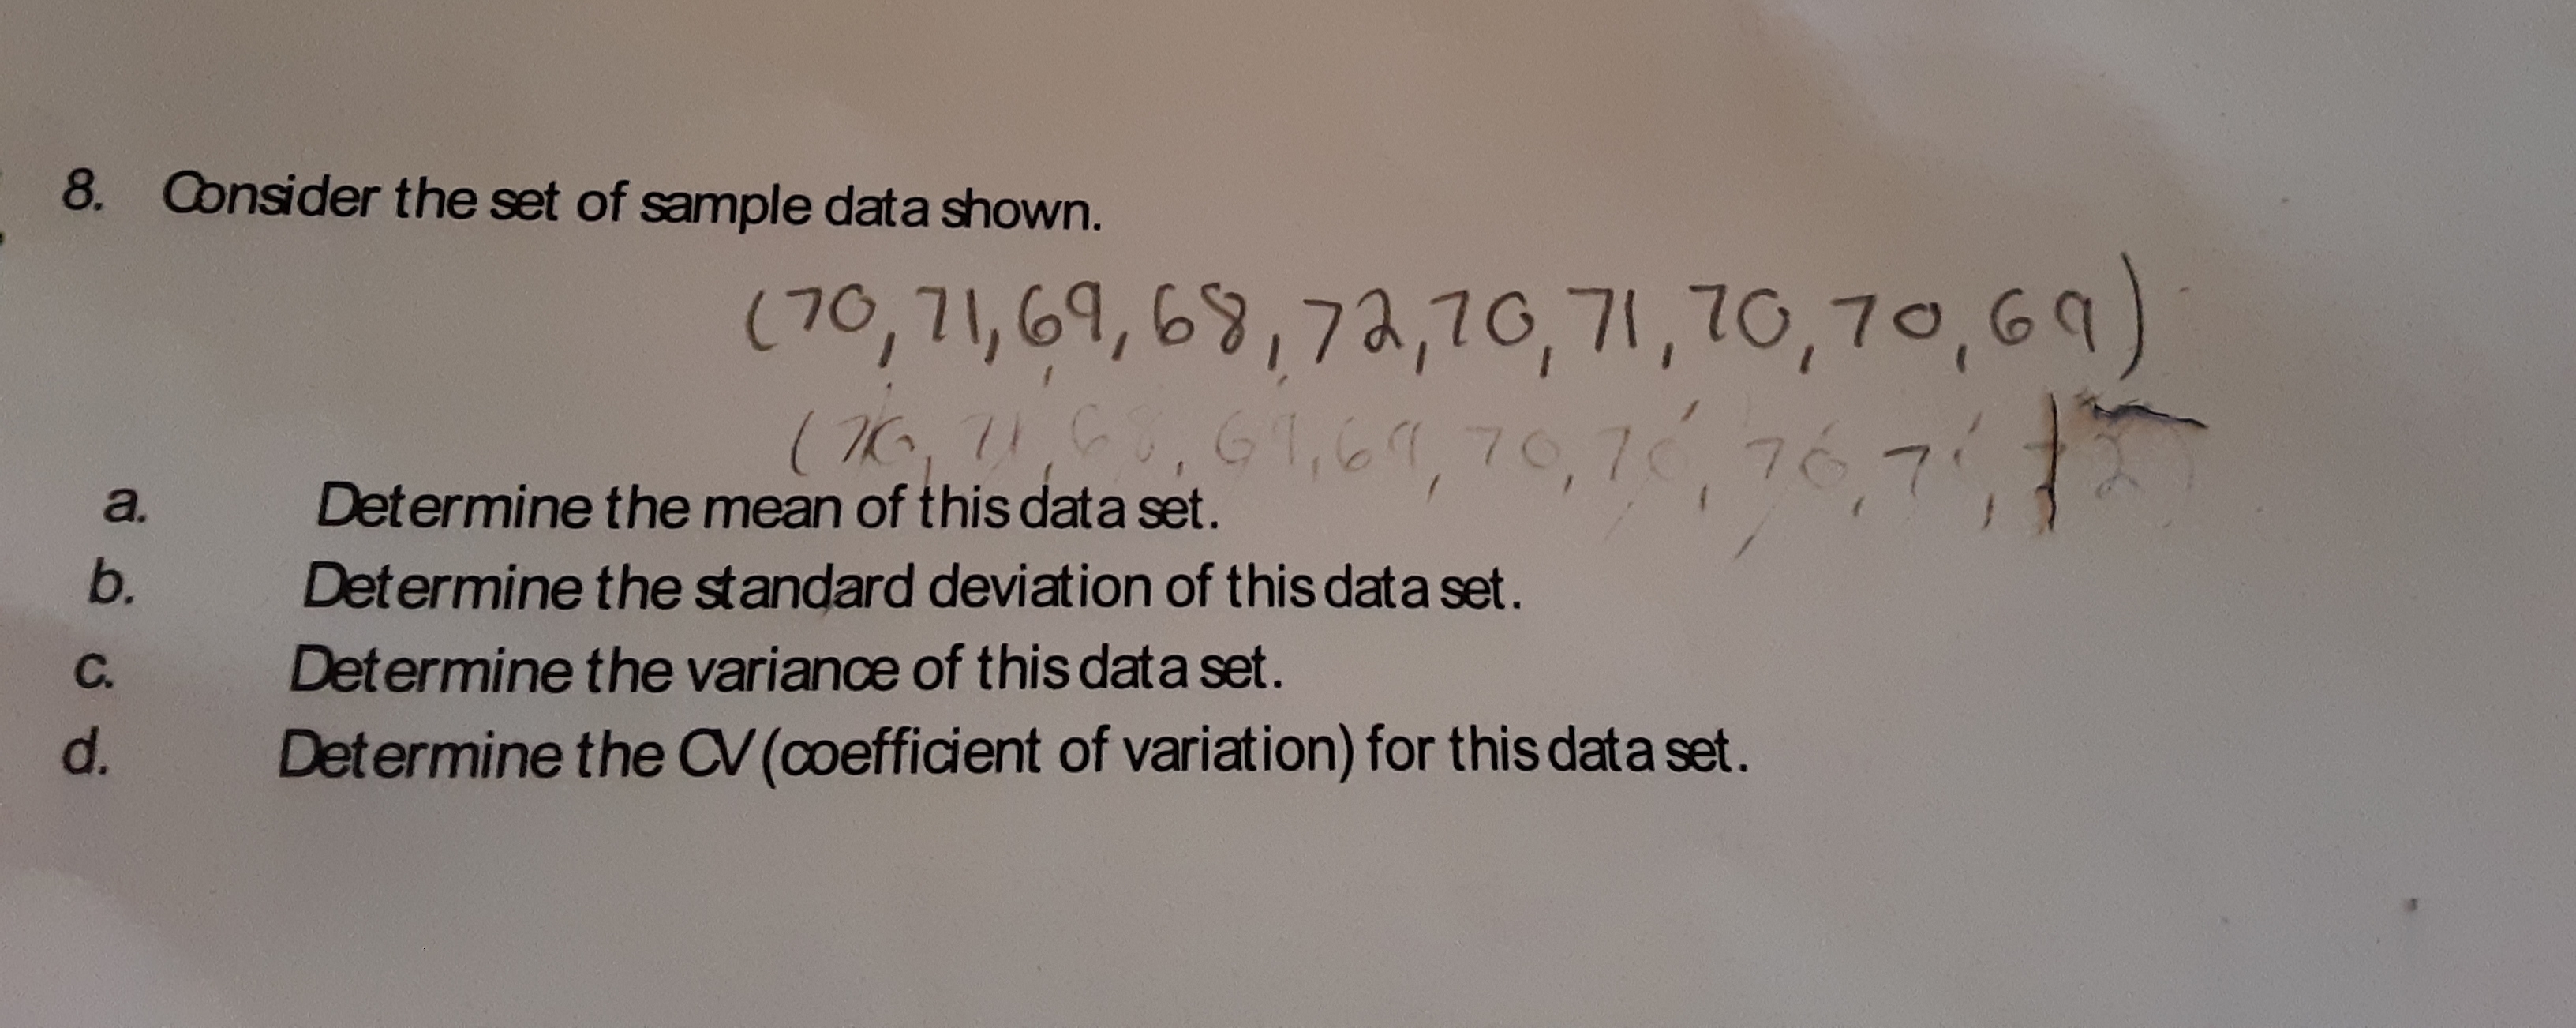 8.
Consider the set of sample data shown.
(70,71,69, 69,7a,70,71,70,70,69
( 0, ,,61,,70,70, 7
Determine the mean of this data set.
a.
b.
Determine the standard deviation of this data set.
Determine the variance of this data set.
С.
d.
Determine the V(coefficient of variation) for this data set.
